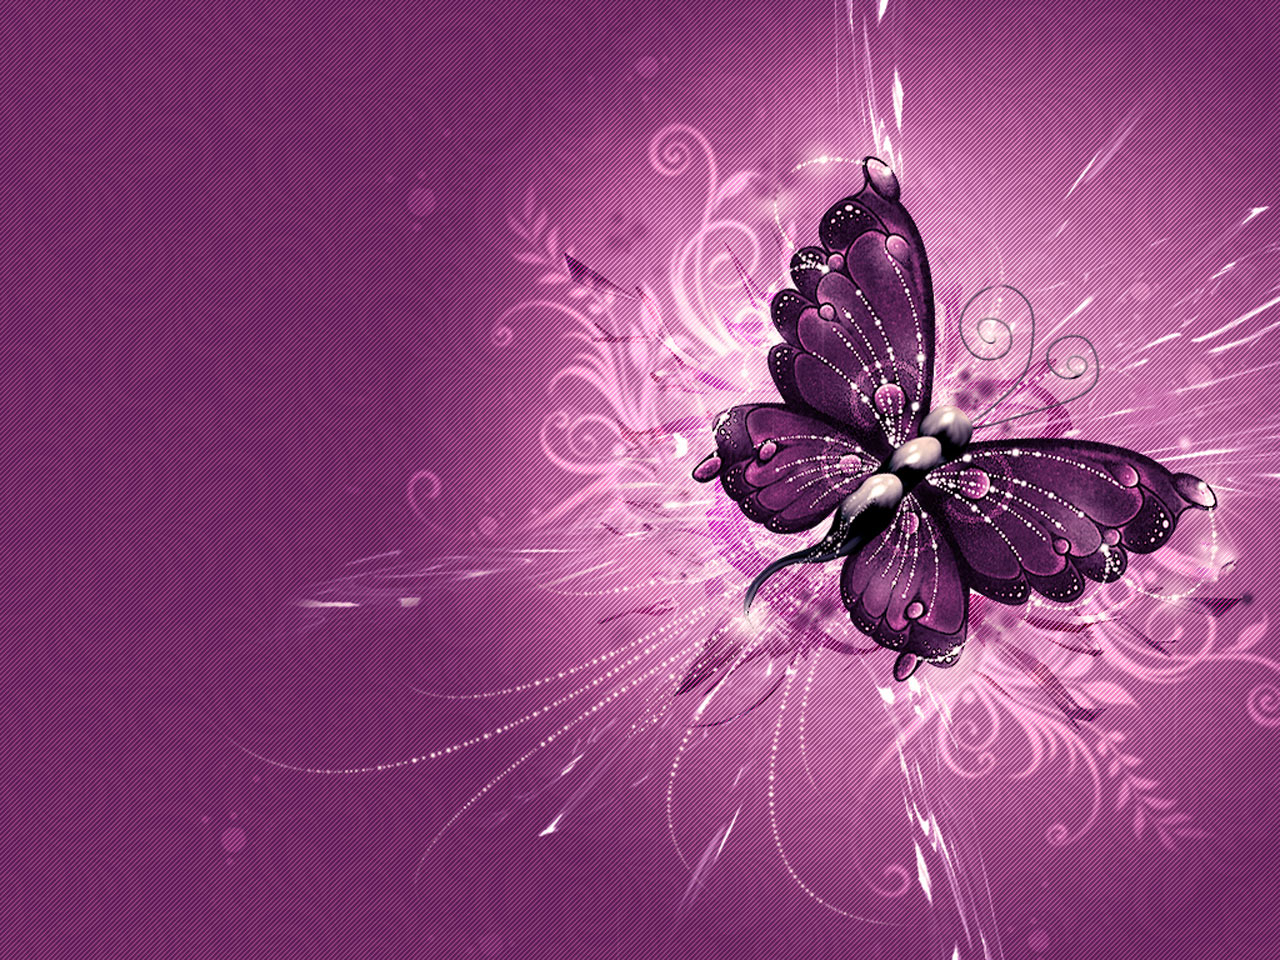 Wallpaper Purple And Make This For Your Desktop Tablet